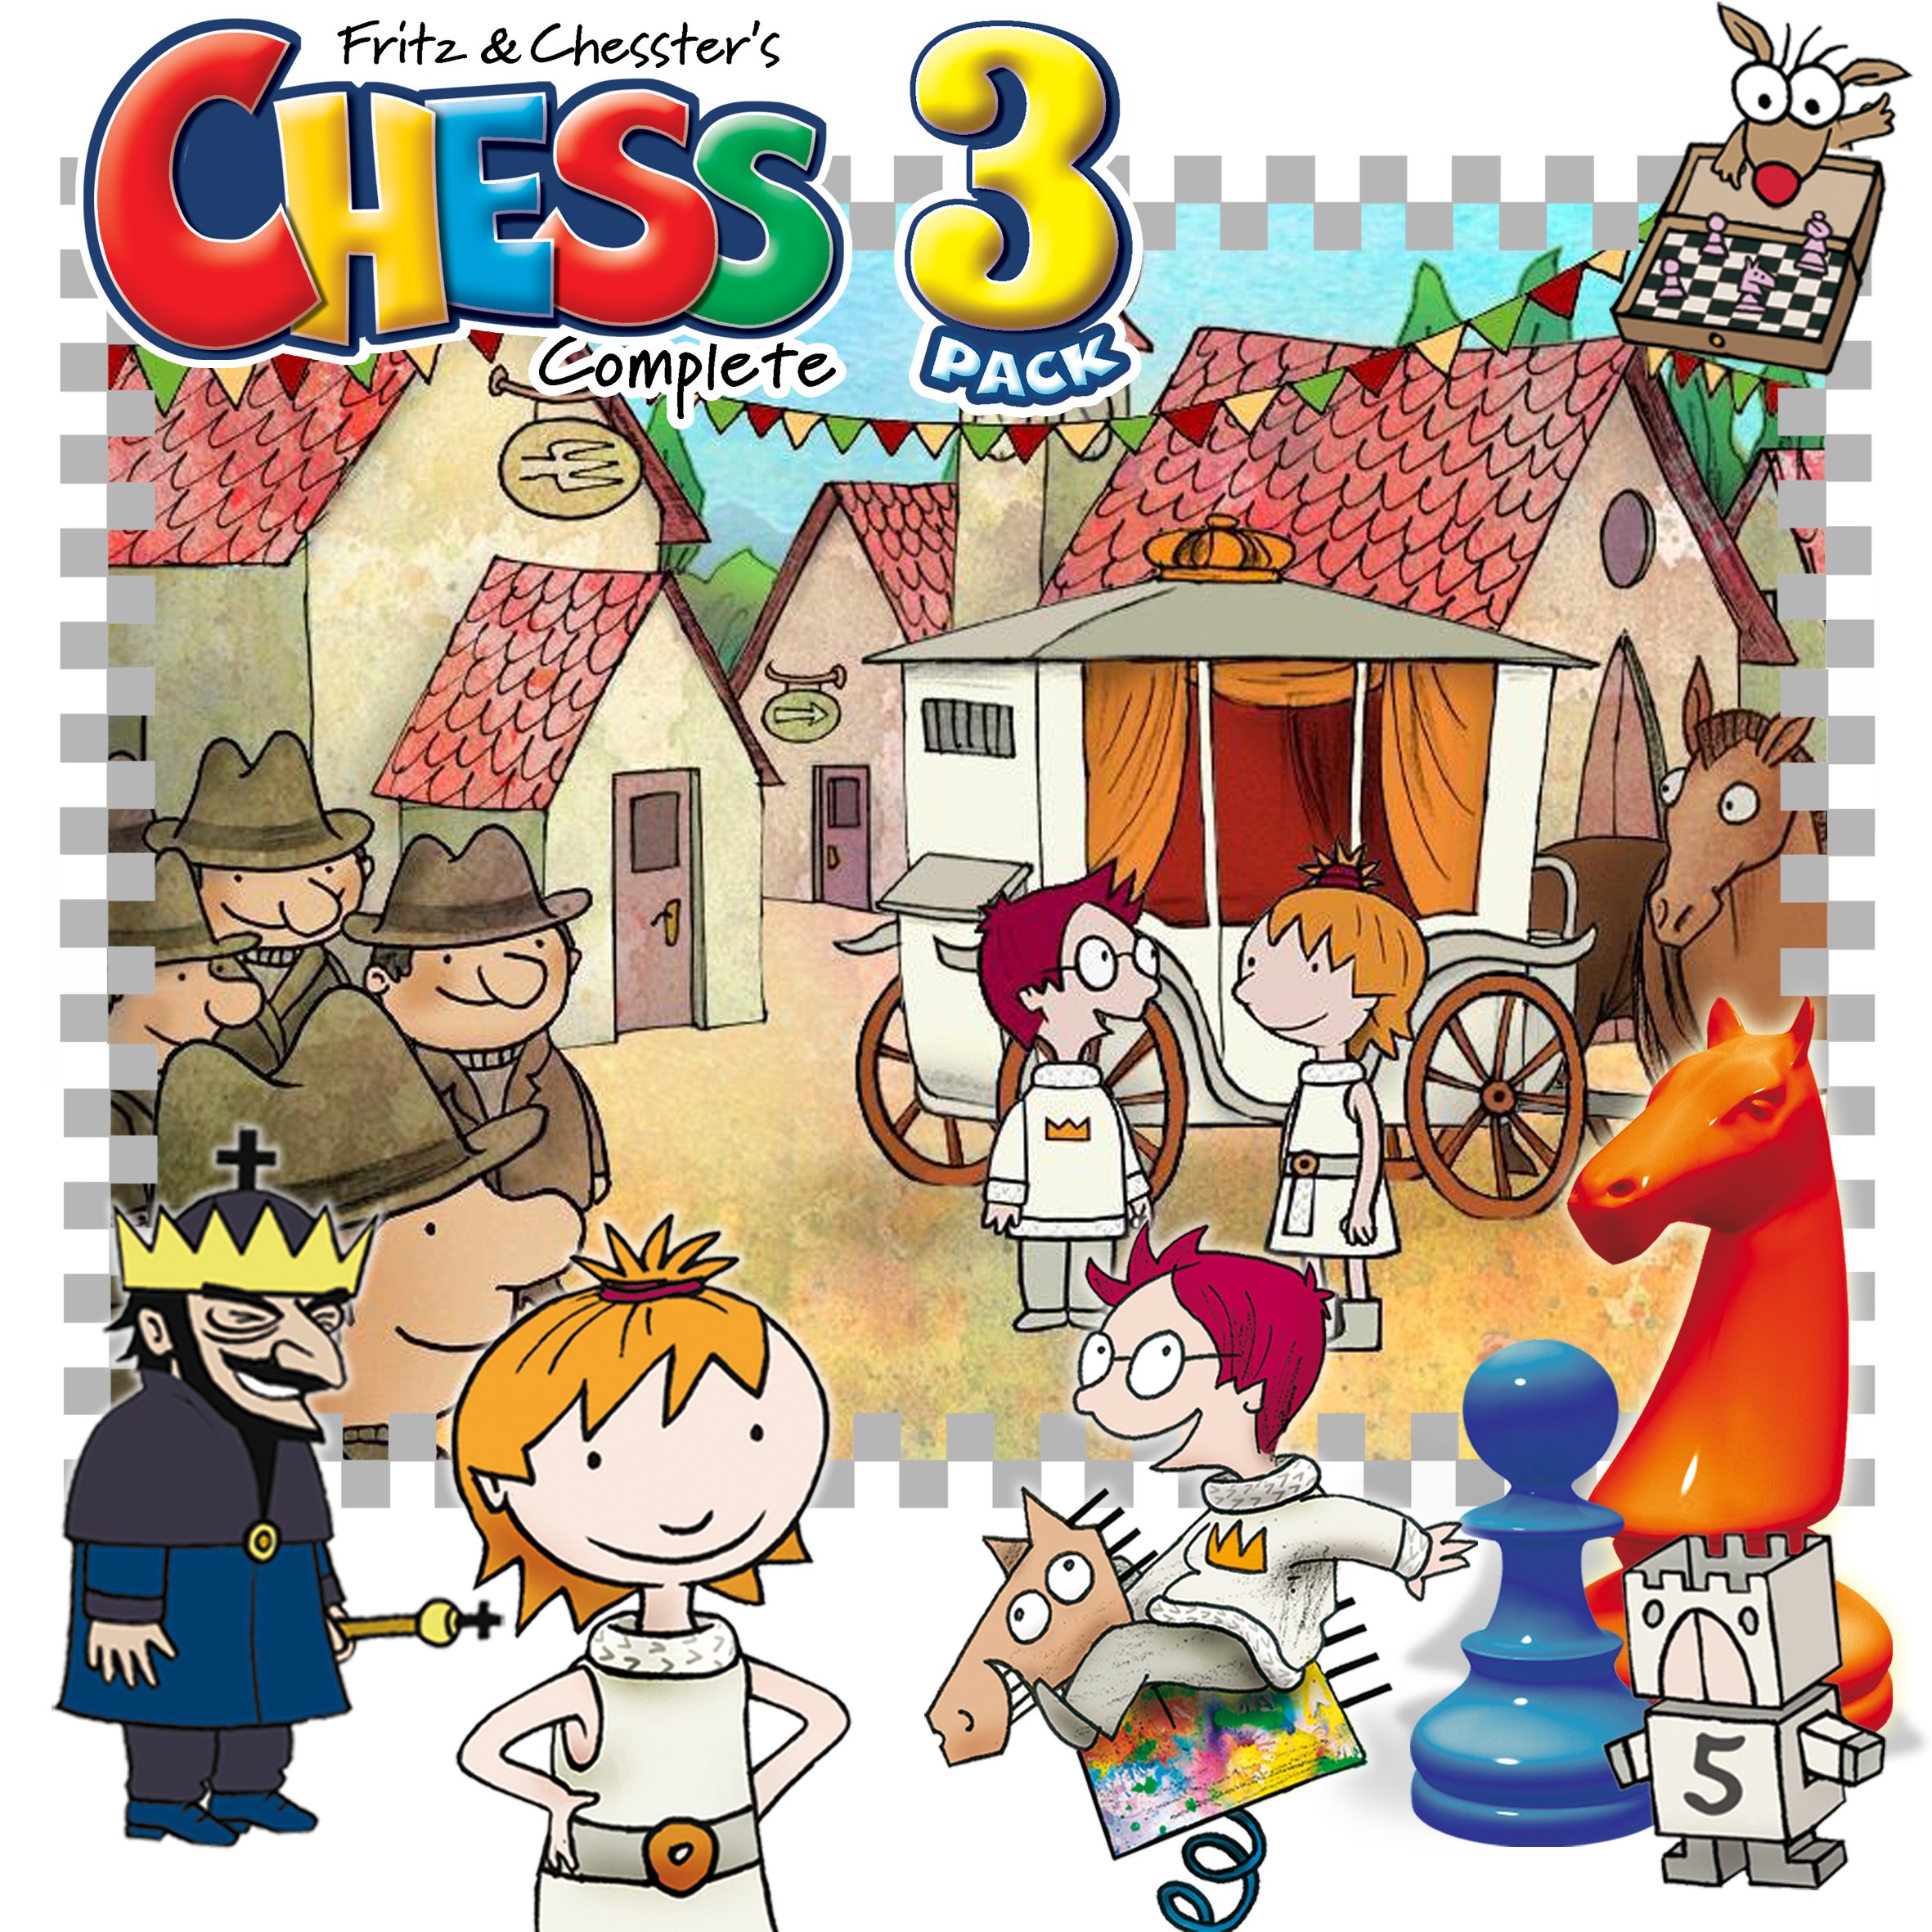 Learn to Play Chess with Fritz & Chesster: Chess Complete 3-Pack [Download]